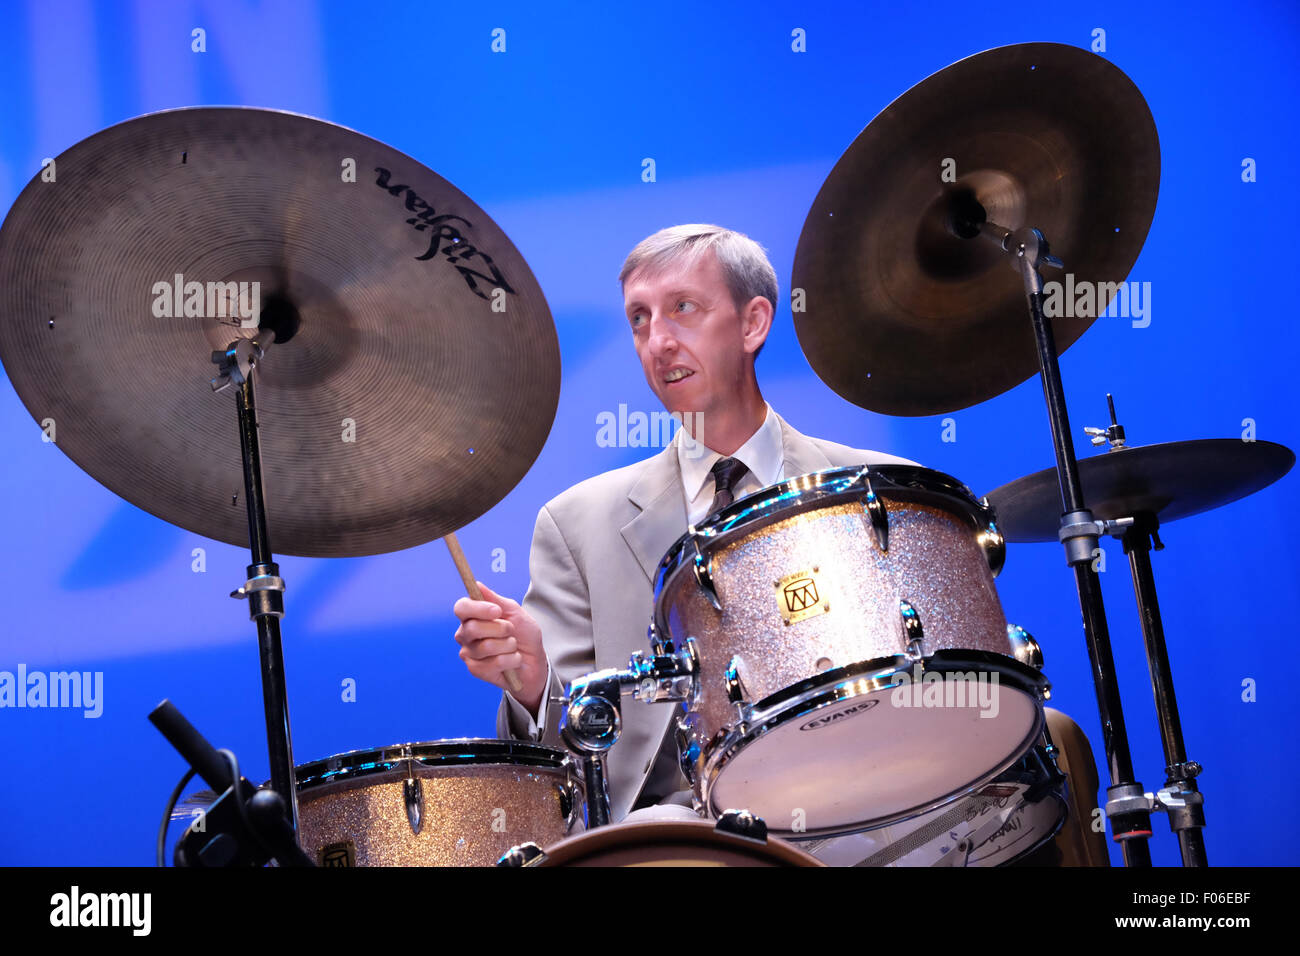 Brecon Jazz Festival, Powys, Wales, UK. August, 2015. Brecon Jazz 2015 the Scott Hamilton Quartet performing at the Brycheiniog Theatre. Photo shows Steve Brown on drums. Stock Photo